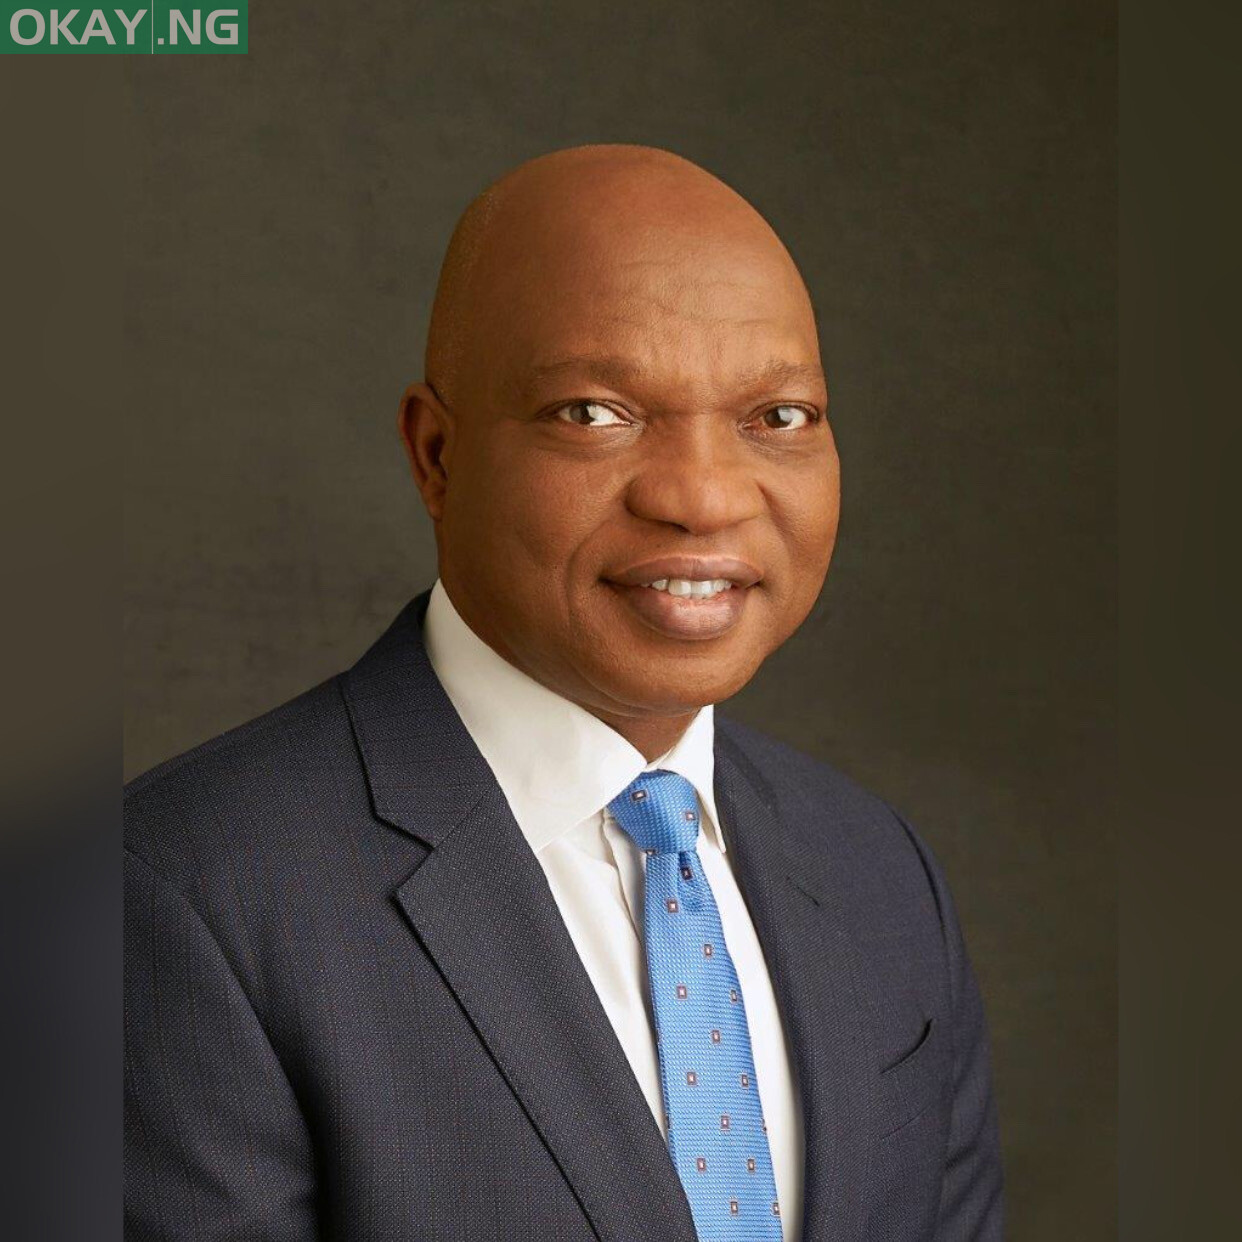 Managing Director, The Shell Petroleum Development Company of Nigeria (SPDC) and Country Chair of Shell Companies in Nigeria.